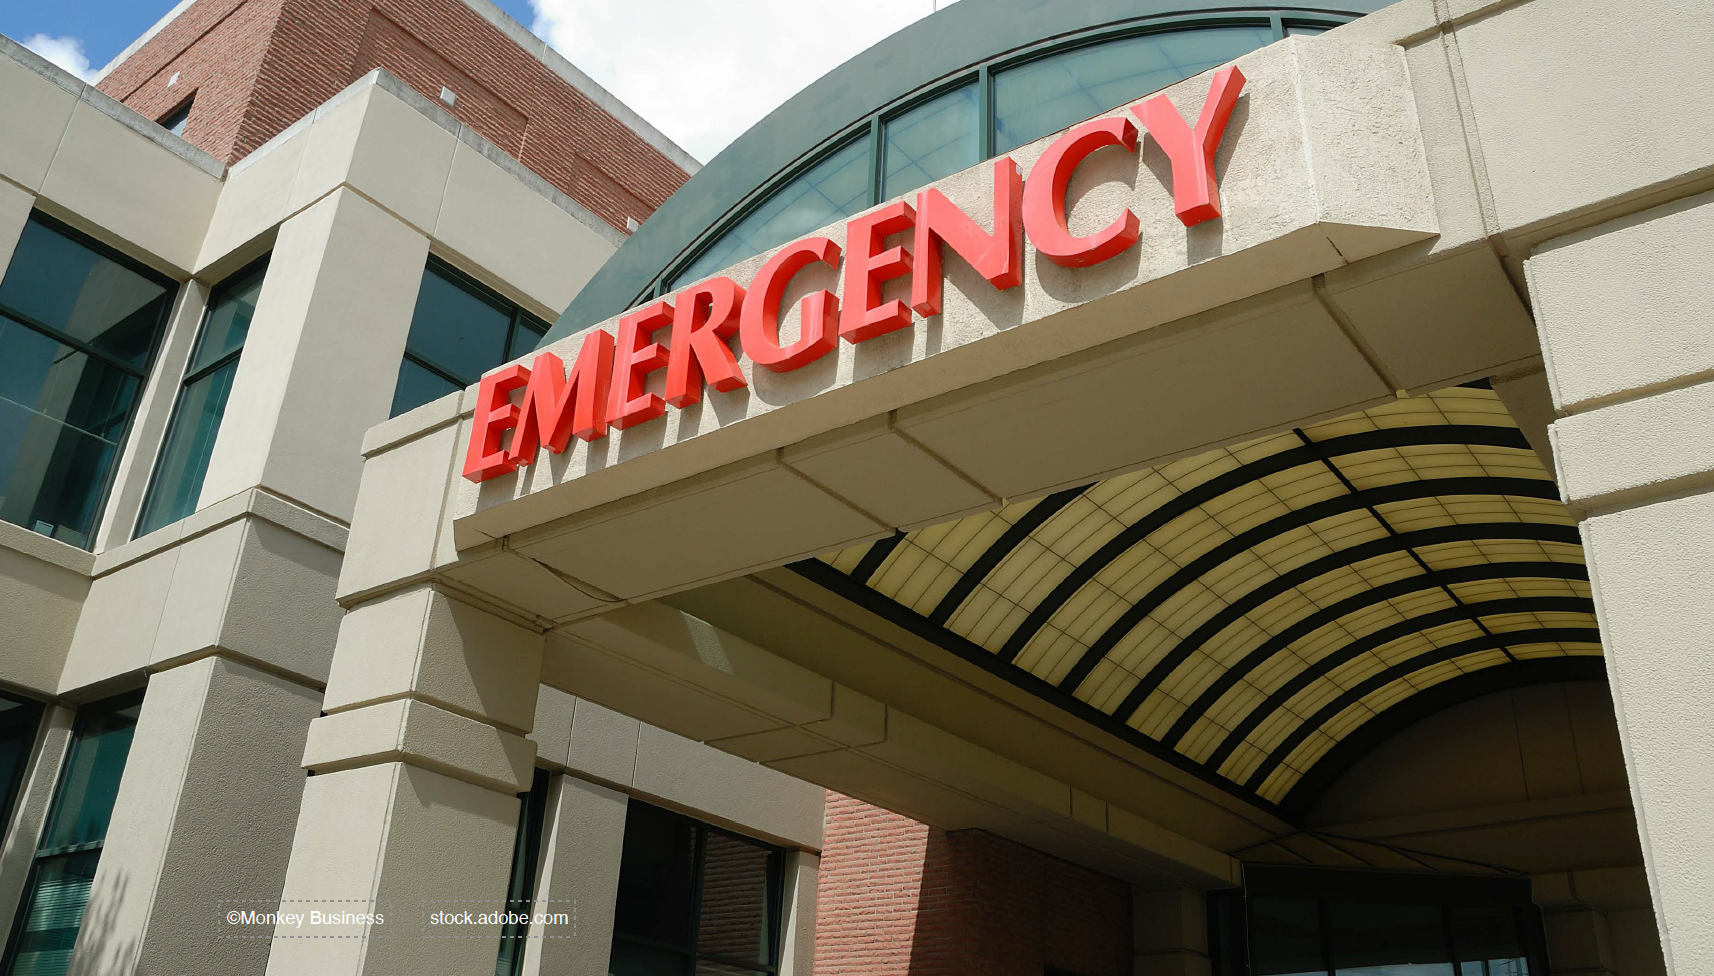 5 lessons from a trip to the emergency department